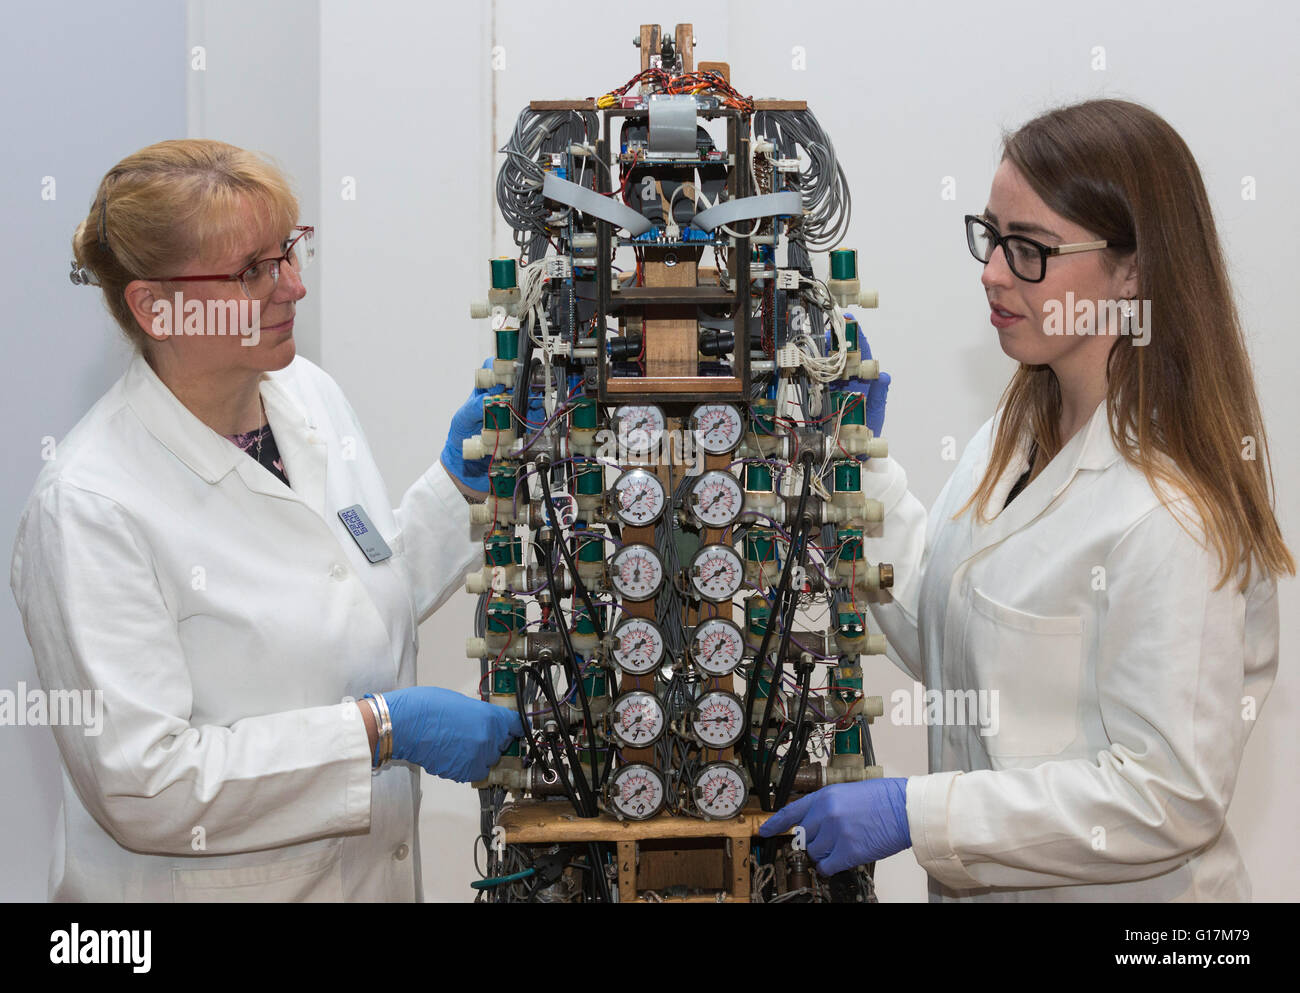 London, UK. 10 May 2016. Conservators Kate Perks and Vanessa Applebaum examine the Bipedal Walker robot, built by David Buckley and the Shadow Robot Project Group, 1987-97. The London Science Museum announces Rise of the Robots, the remarkable 500-year history of robots, in a new exhibition starting February 2017. Over 100 robots will feature in the exhibition which makes it the most significant collection of humanoid robots ever displayed in the world. Stock Photo